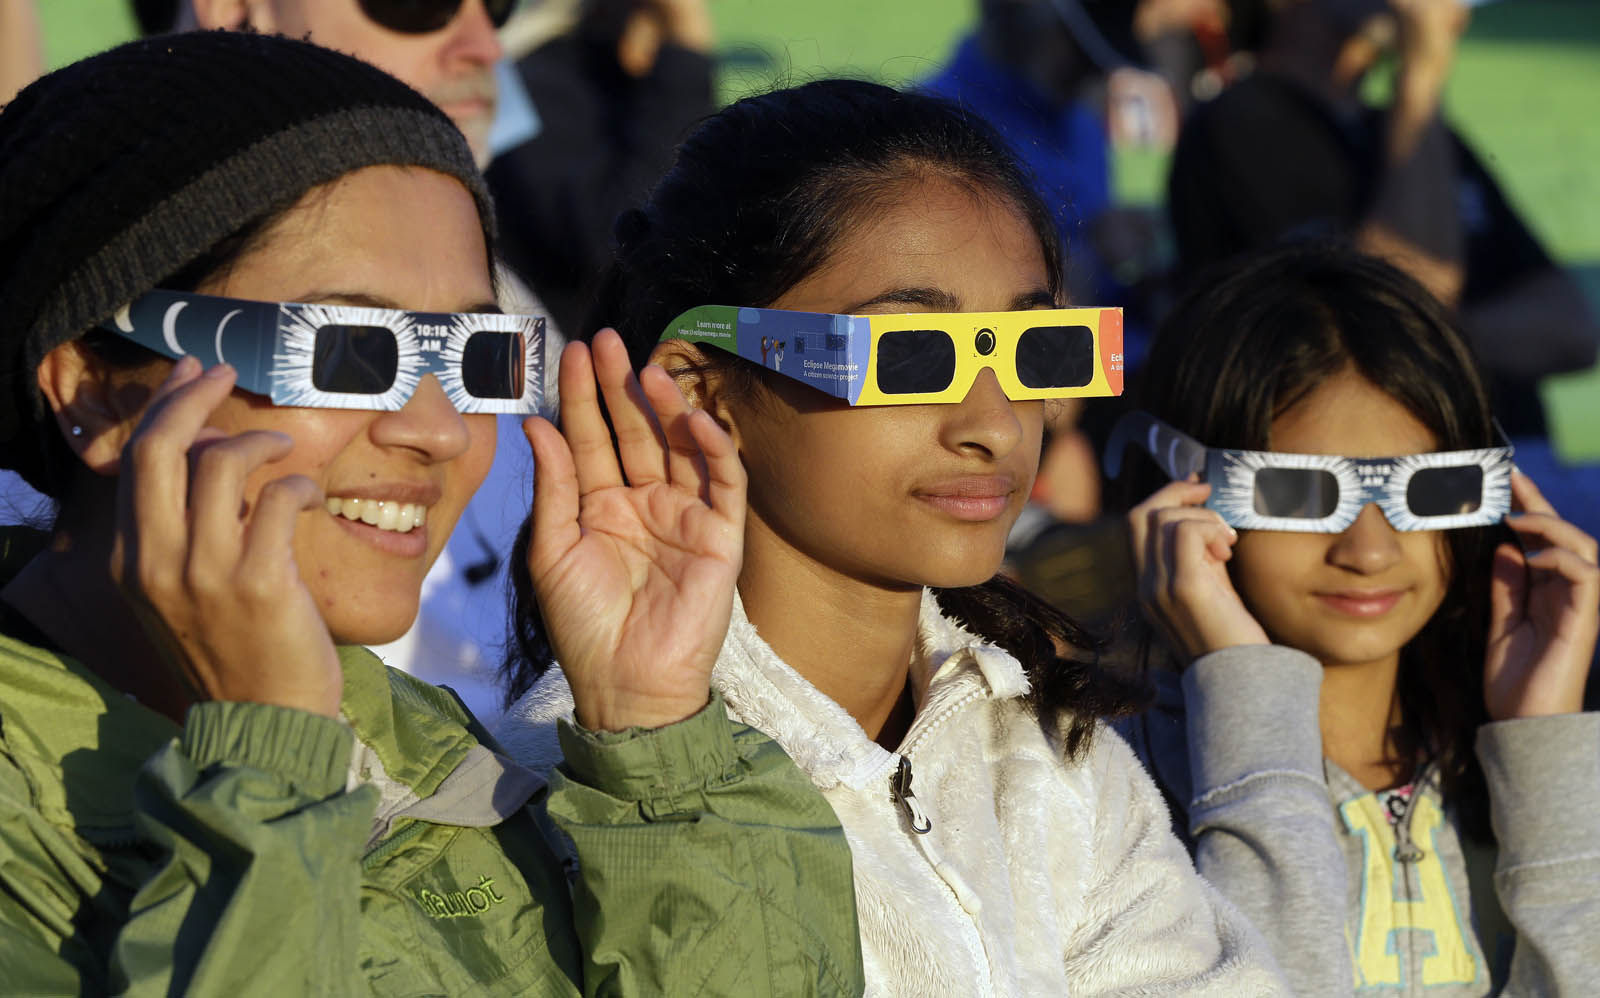 Schweta Kulkarni, from left, Rhea Kulkarni and Saanvi Kulkarni, from Seattle, try out their eclipse glasses on the sun at a gathering of eclipse viewers in Salem, Ore., early Monday, Aug. 21, 2017. (AP Photo/Don Ryan)